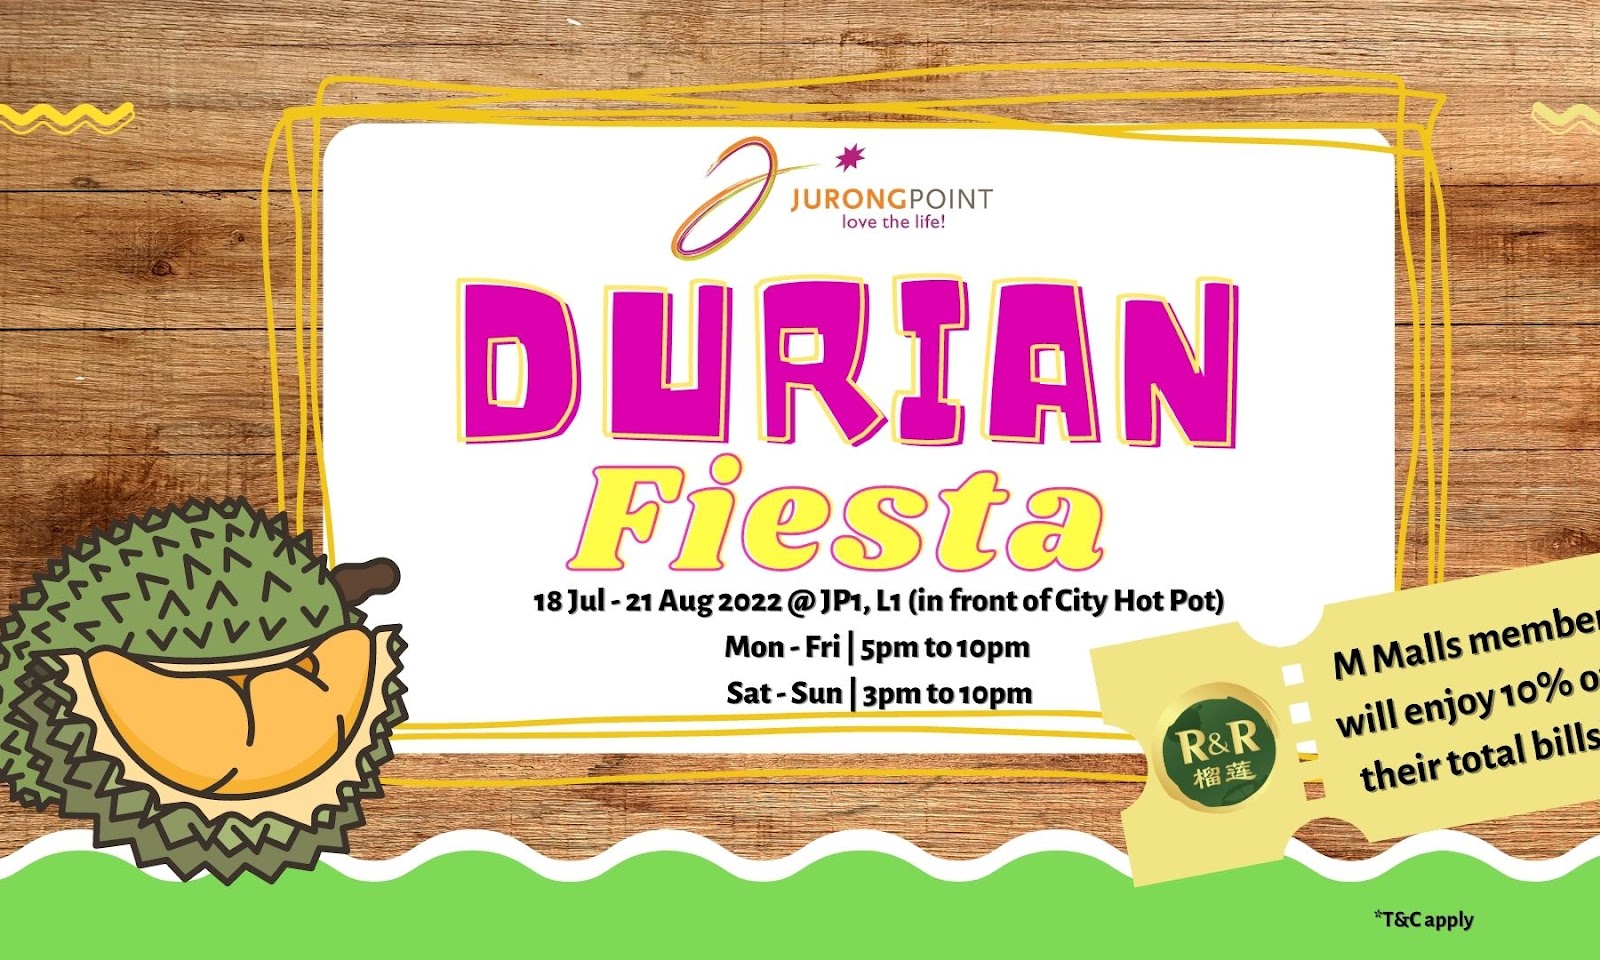 Durian Fiesta: Jurong Point offers all-you-can-eat durian buffet from $38!